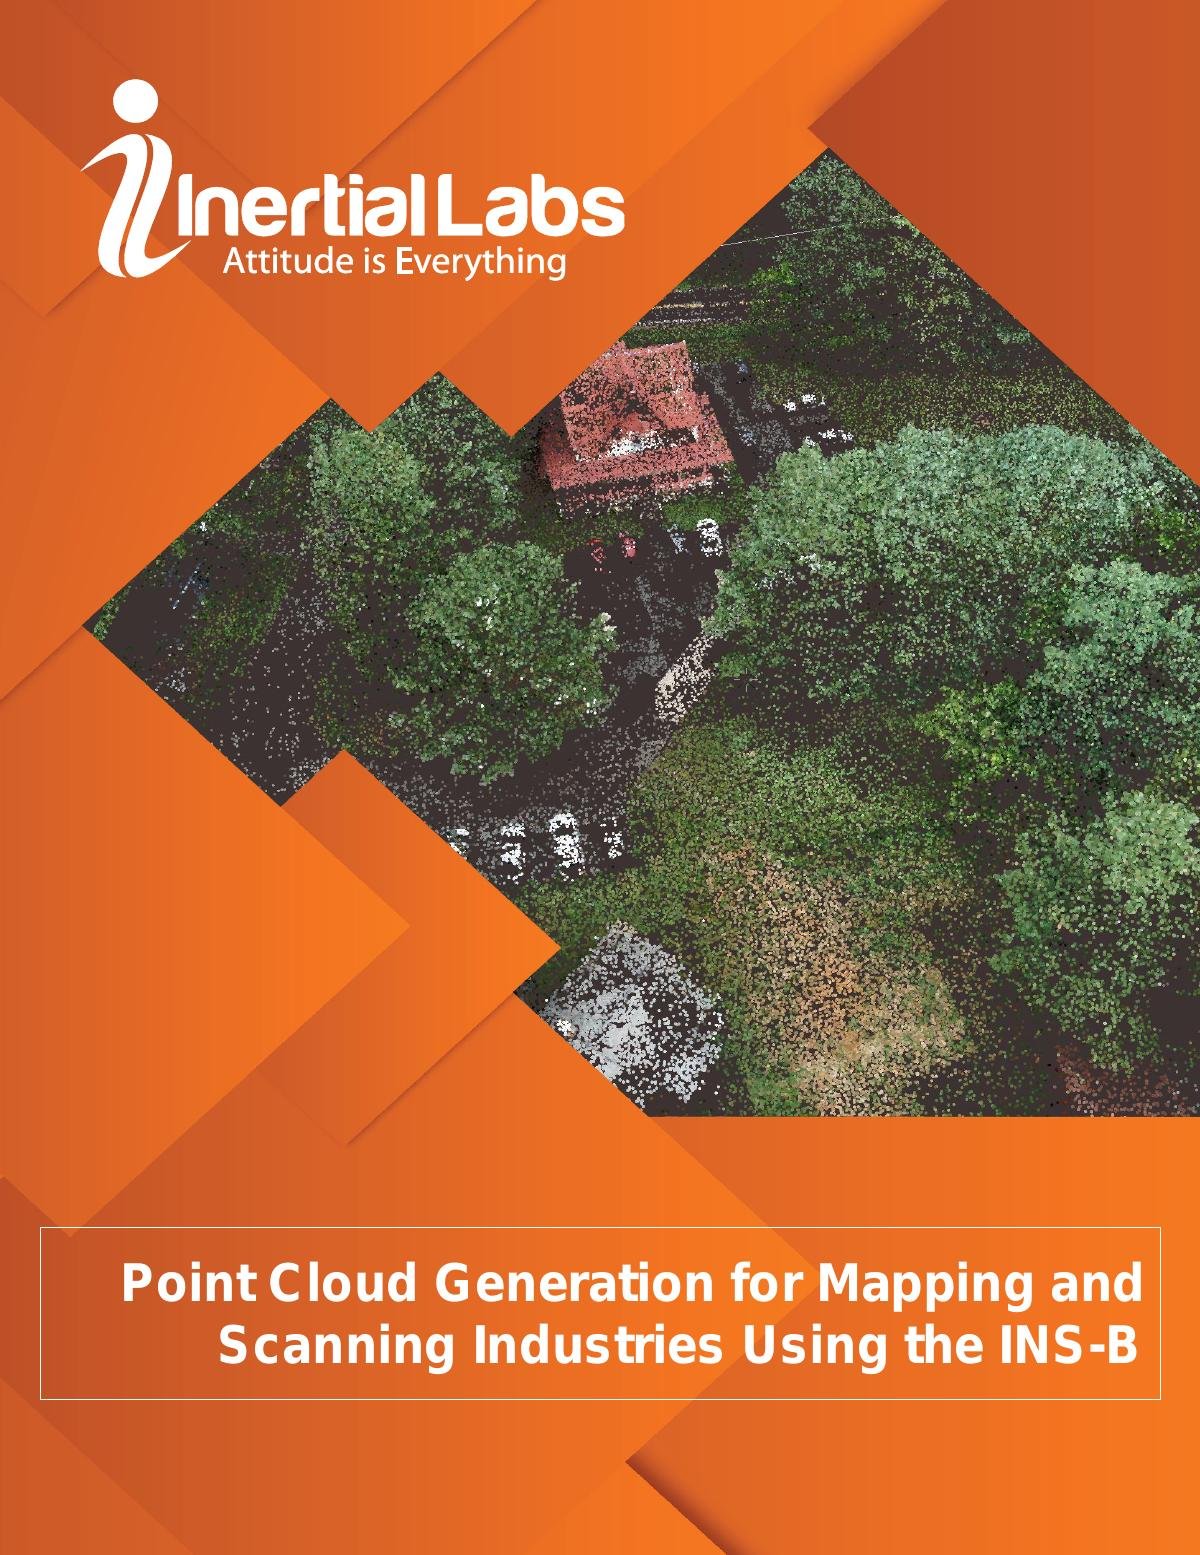 Point Cloud Generation for Mapping and Scanning Industries Using the INS-B